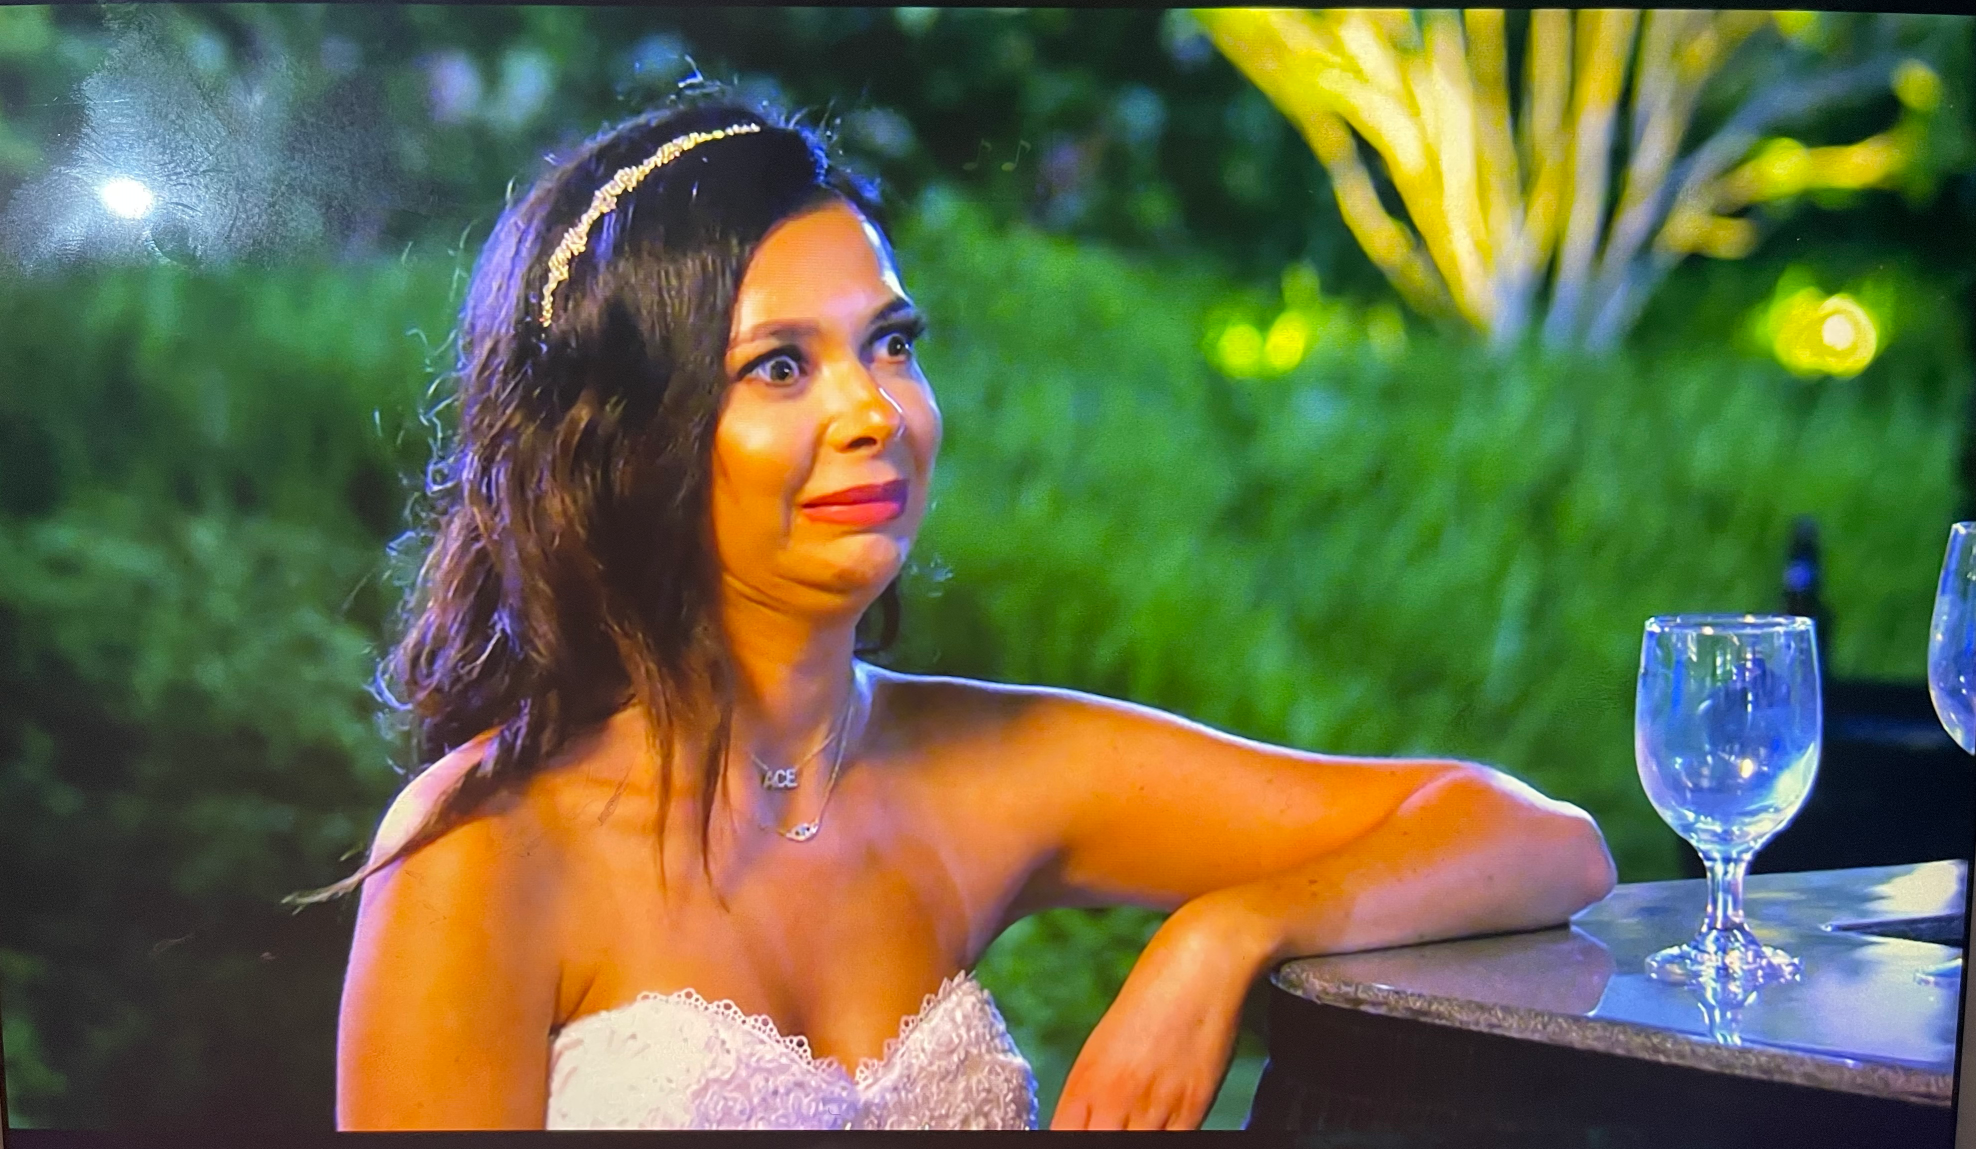 Alyssa Married at First Sight Blank Meme Template